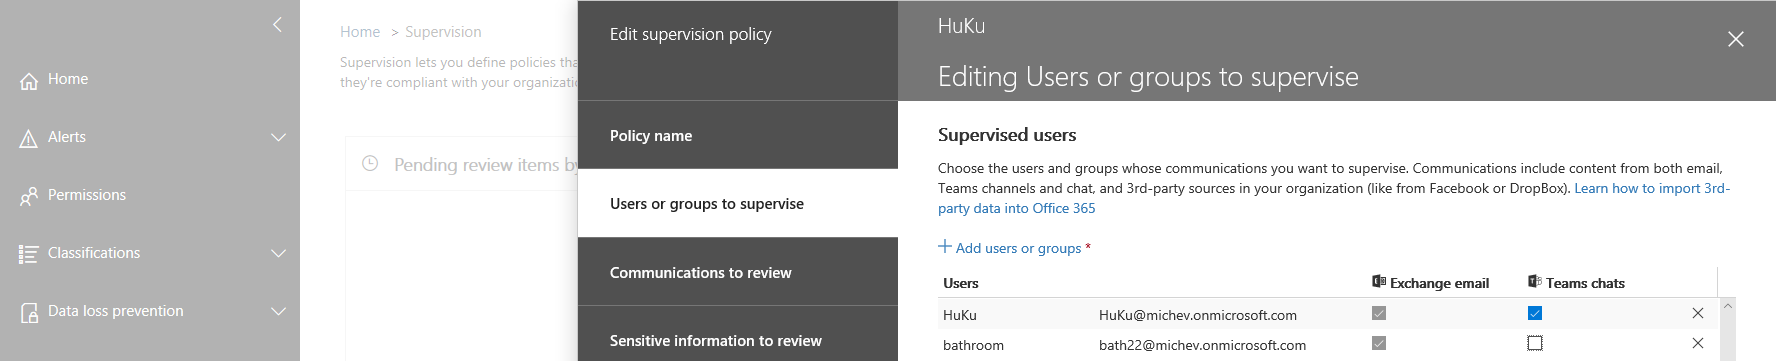 Office 365 Supervision Improvements